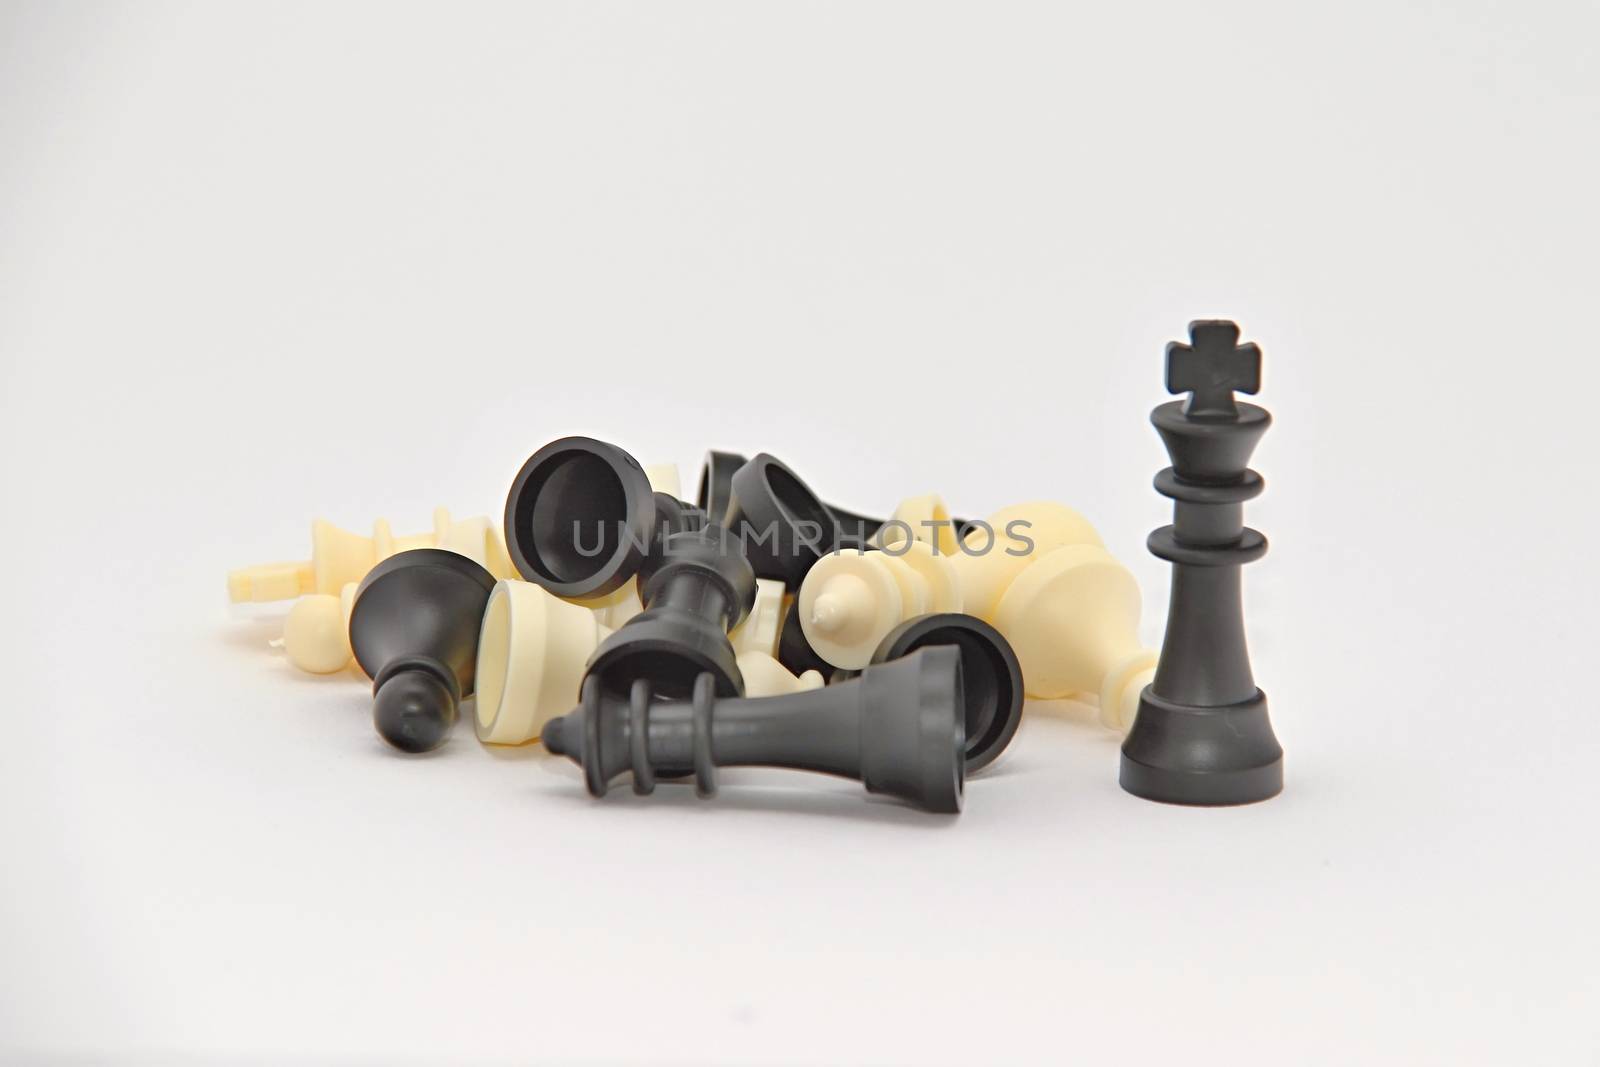 Photo of Chess Figurines perfectly fits to various presentation purposes.